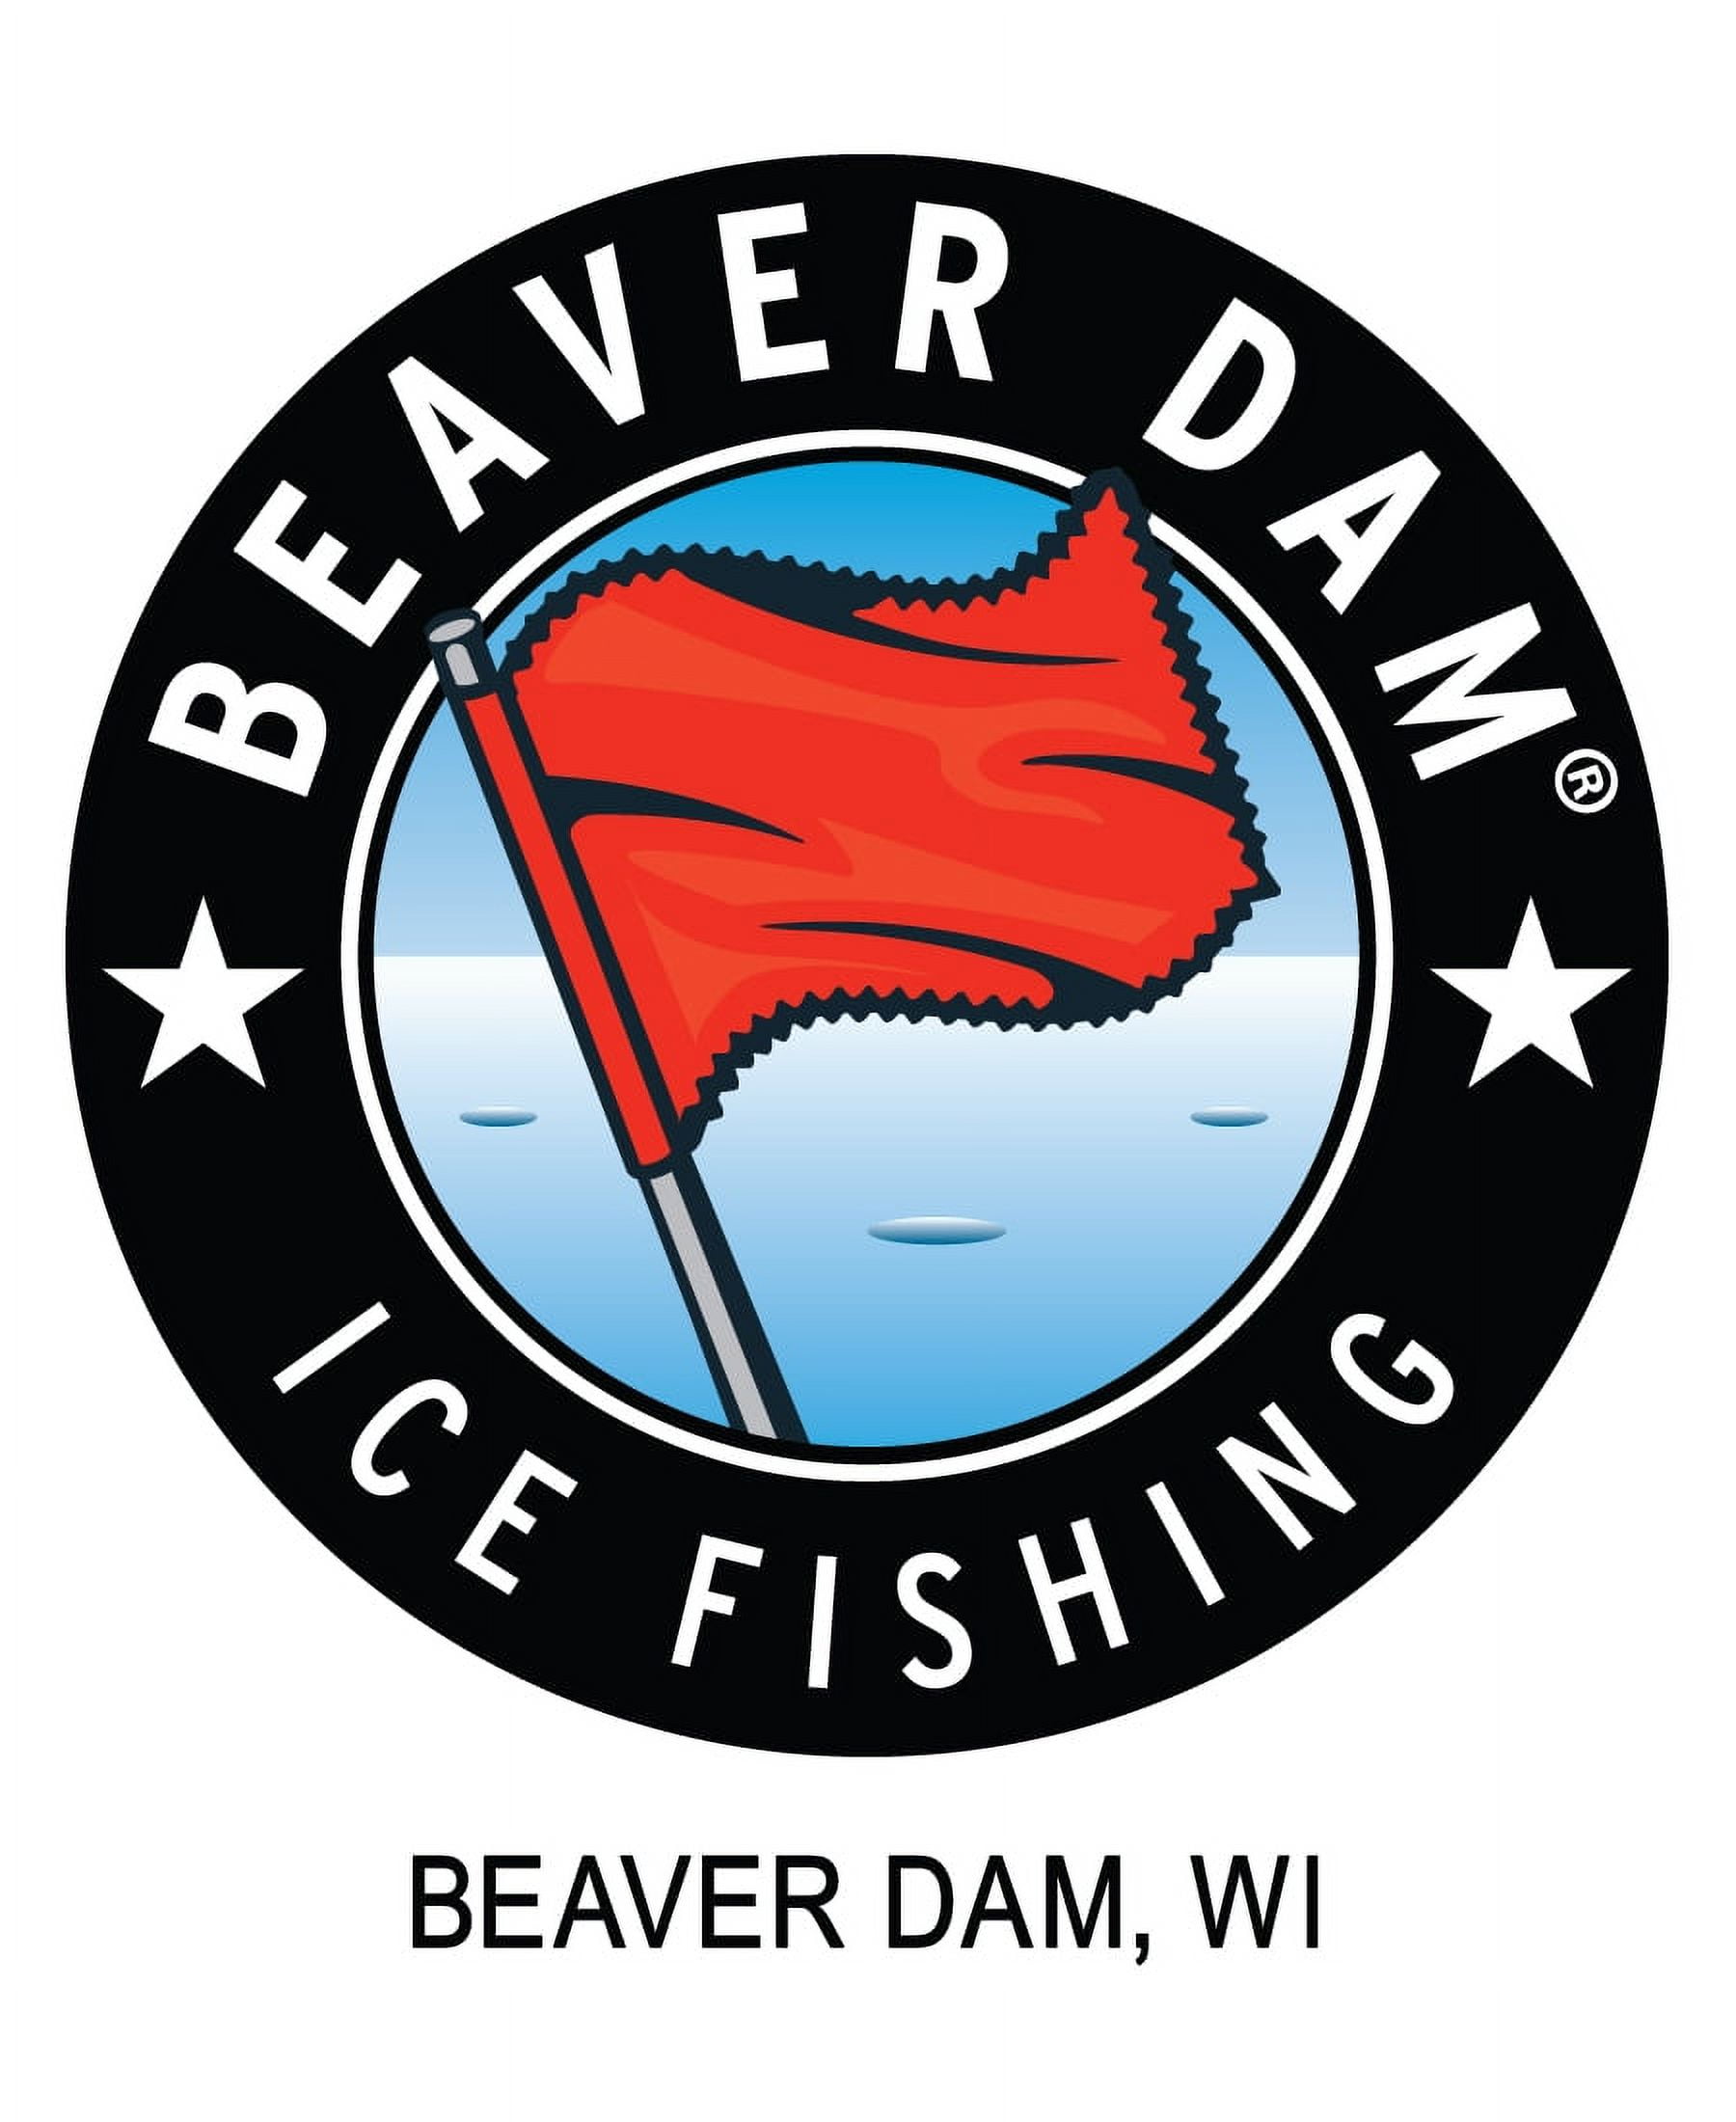 4 NEW Beaver Dam Ice TIP UP Line 30lb Test-50 Yards EACH FISHING